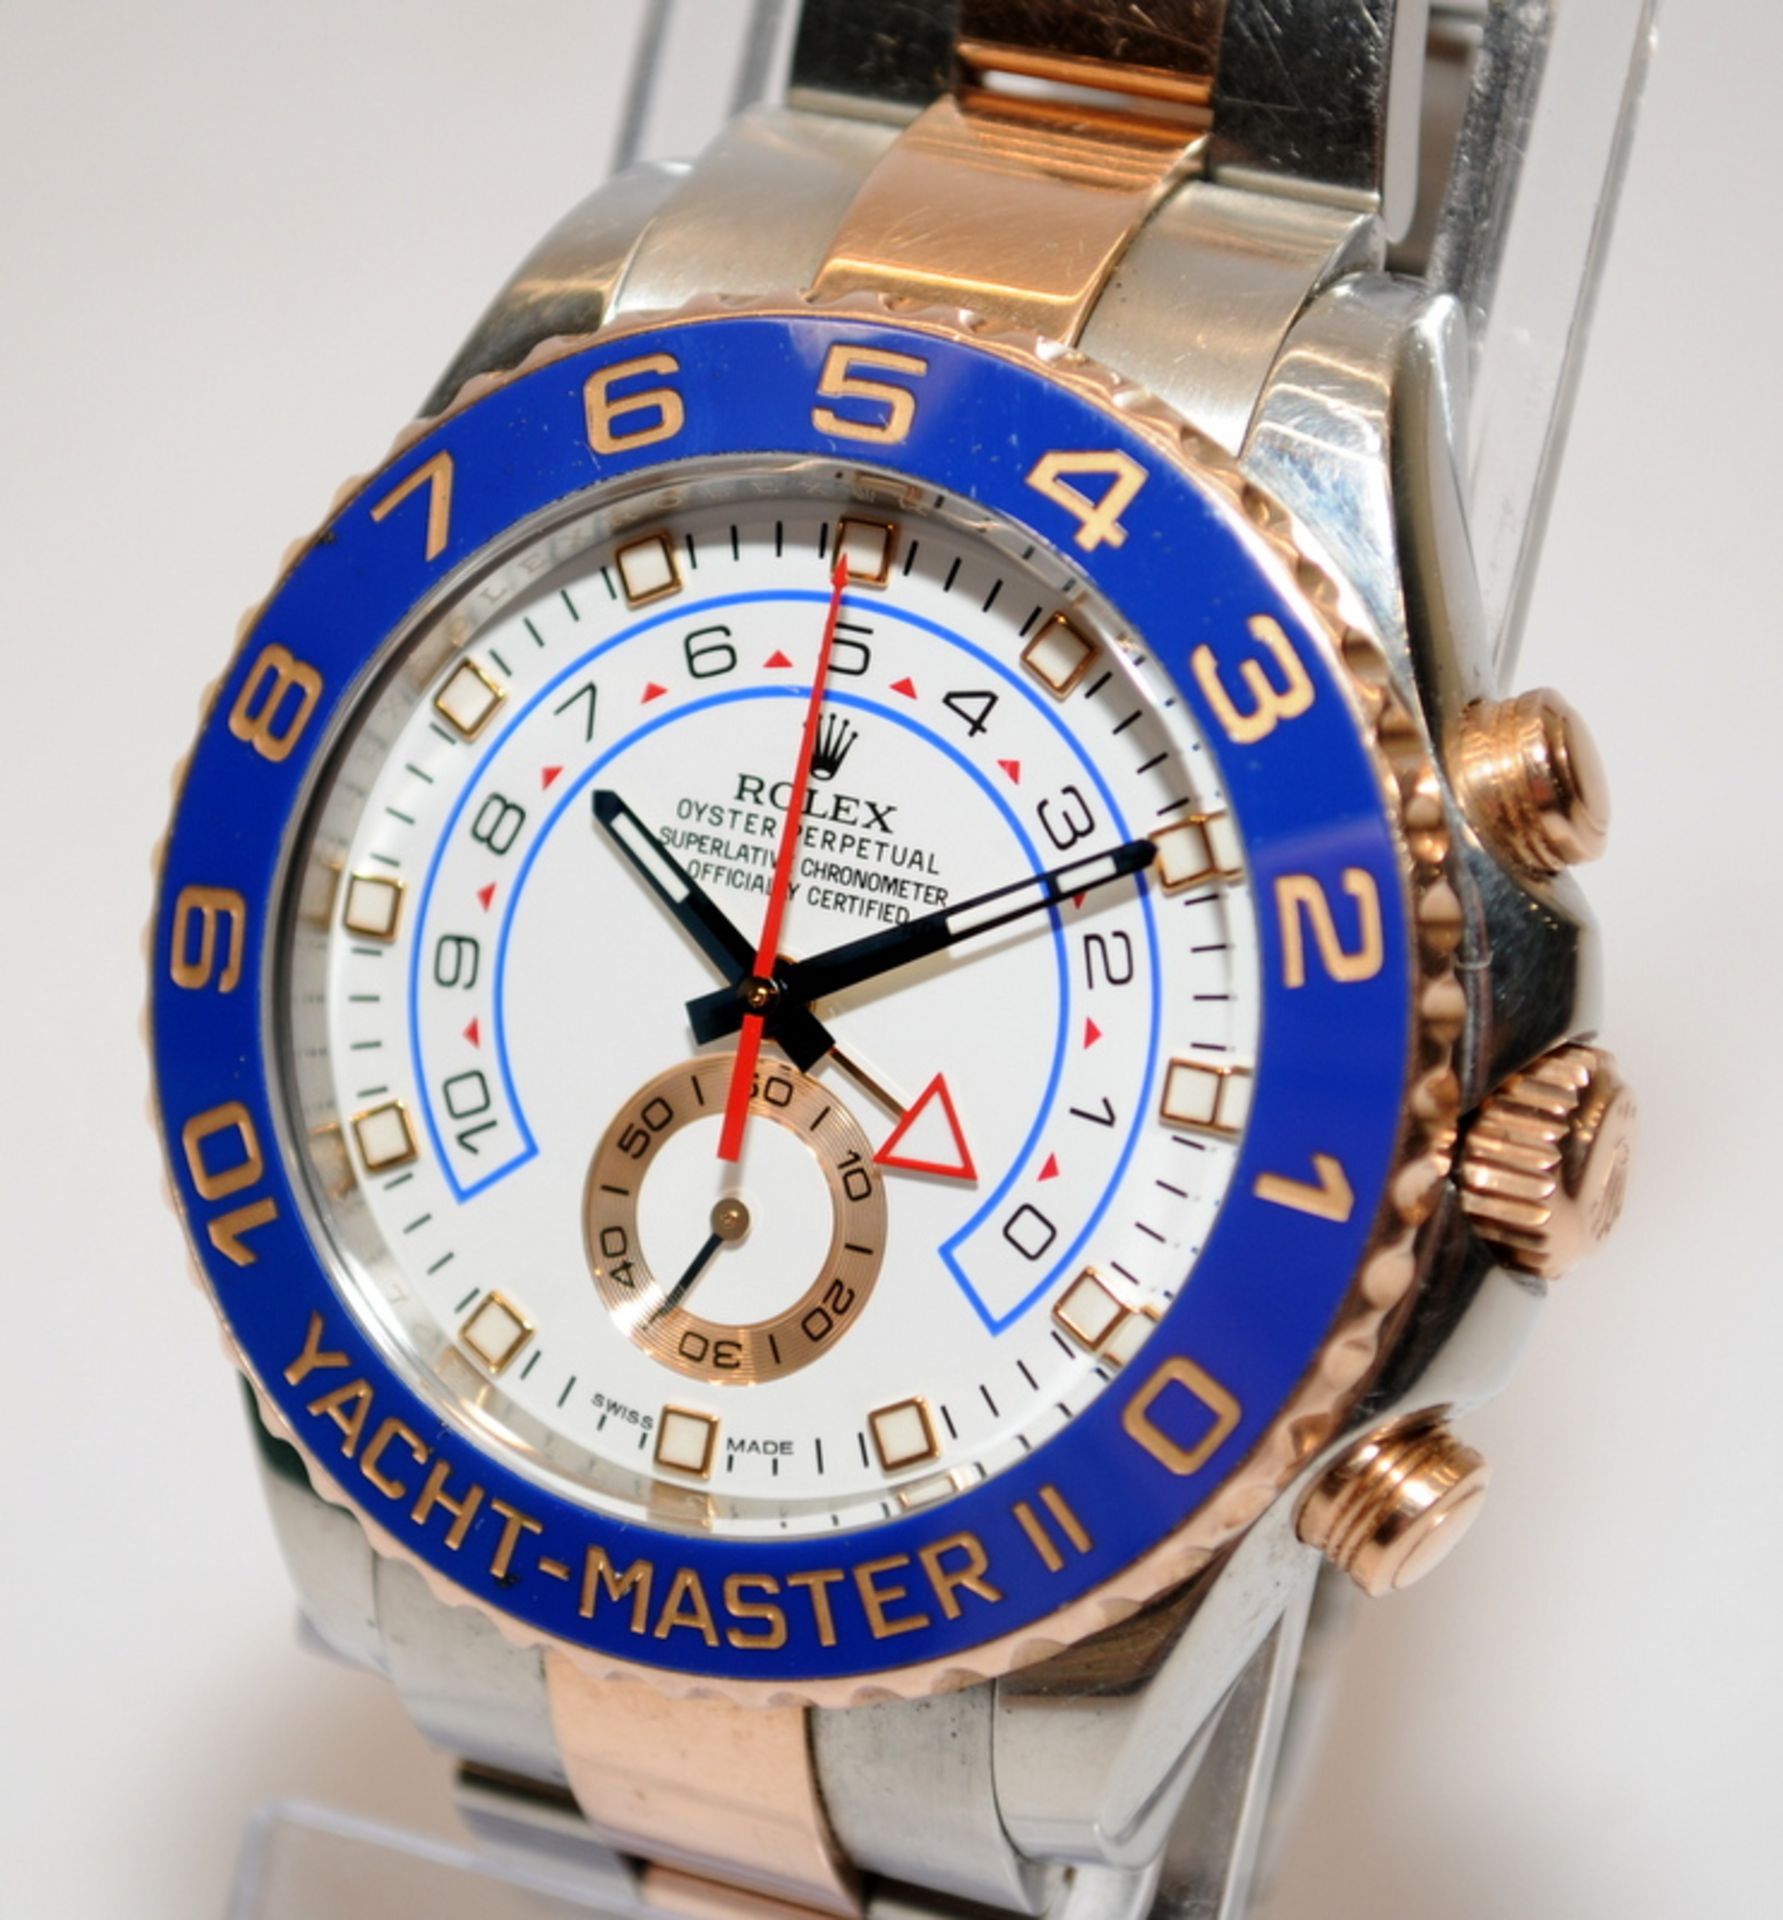 LATE ENTRY: Rolex Yachtmaster II gents watch, Bi Metal, Model:116681, 2015, complete with cards, - Image 2 of 9